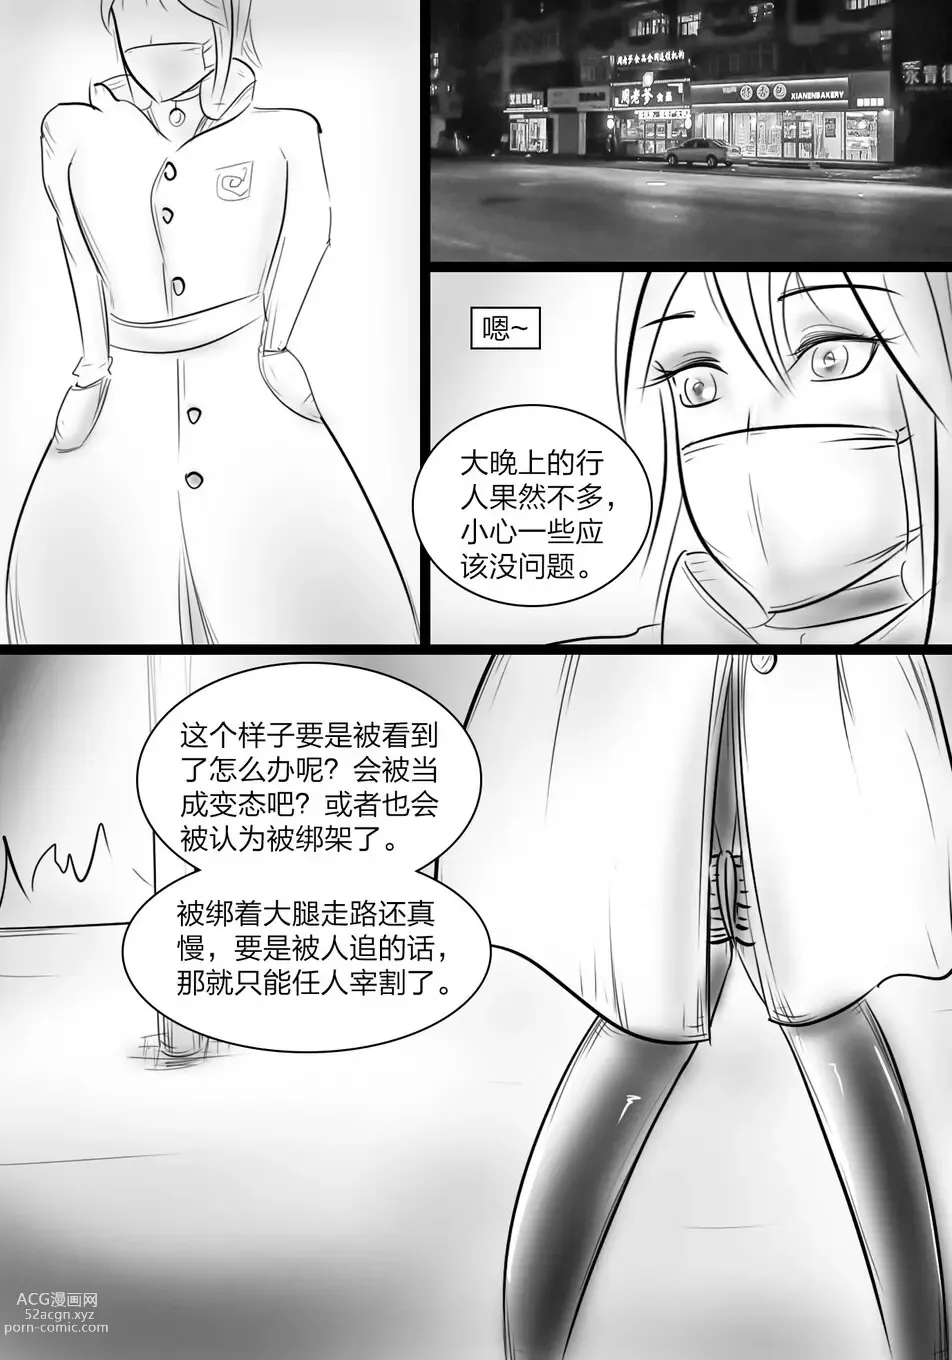 Page 4 of doujinshi The crisis in public self bondage